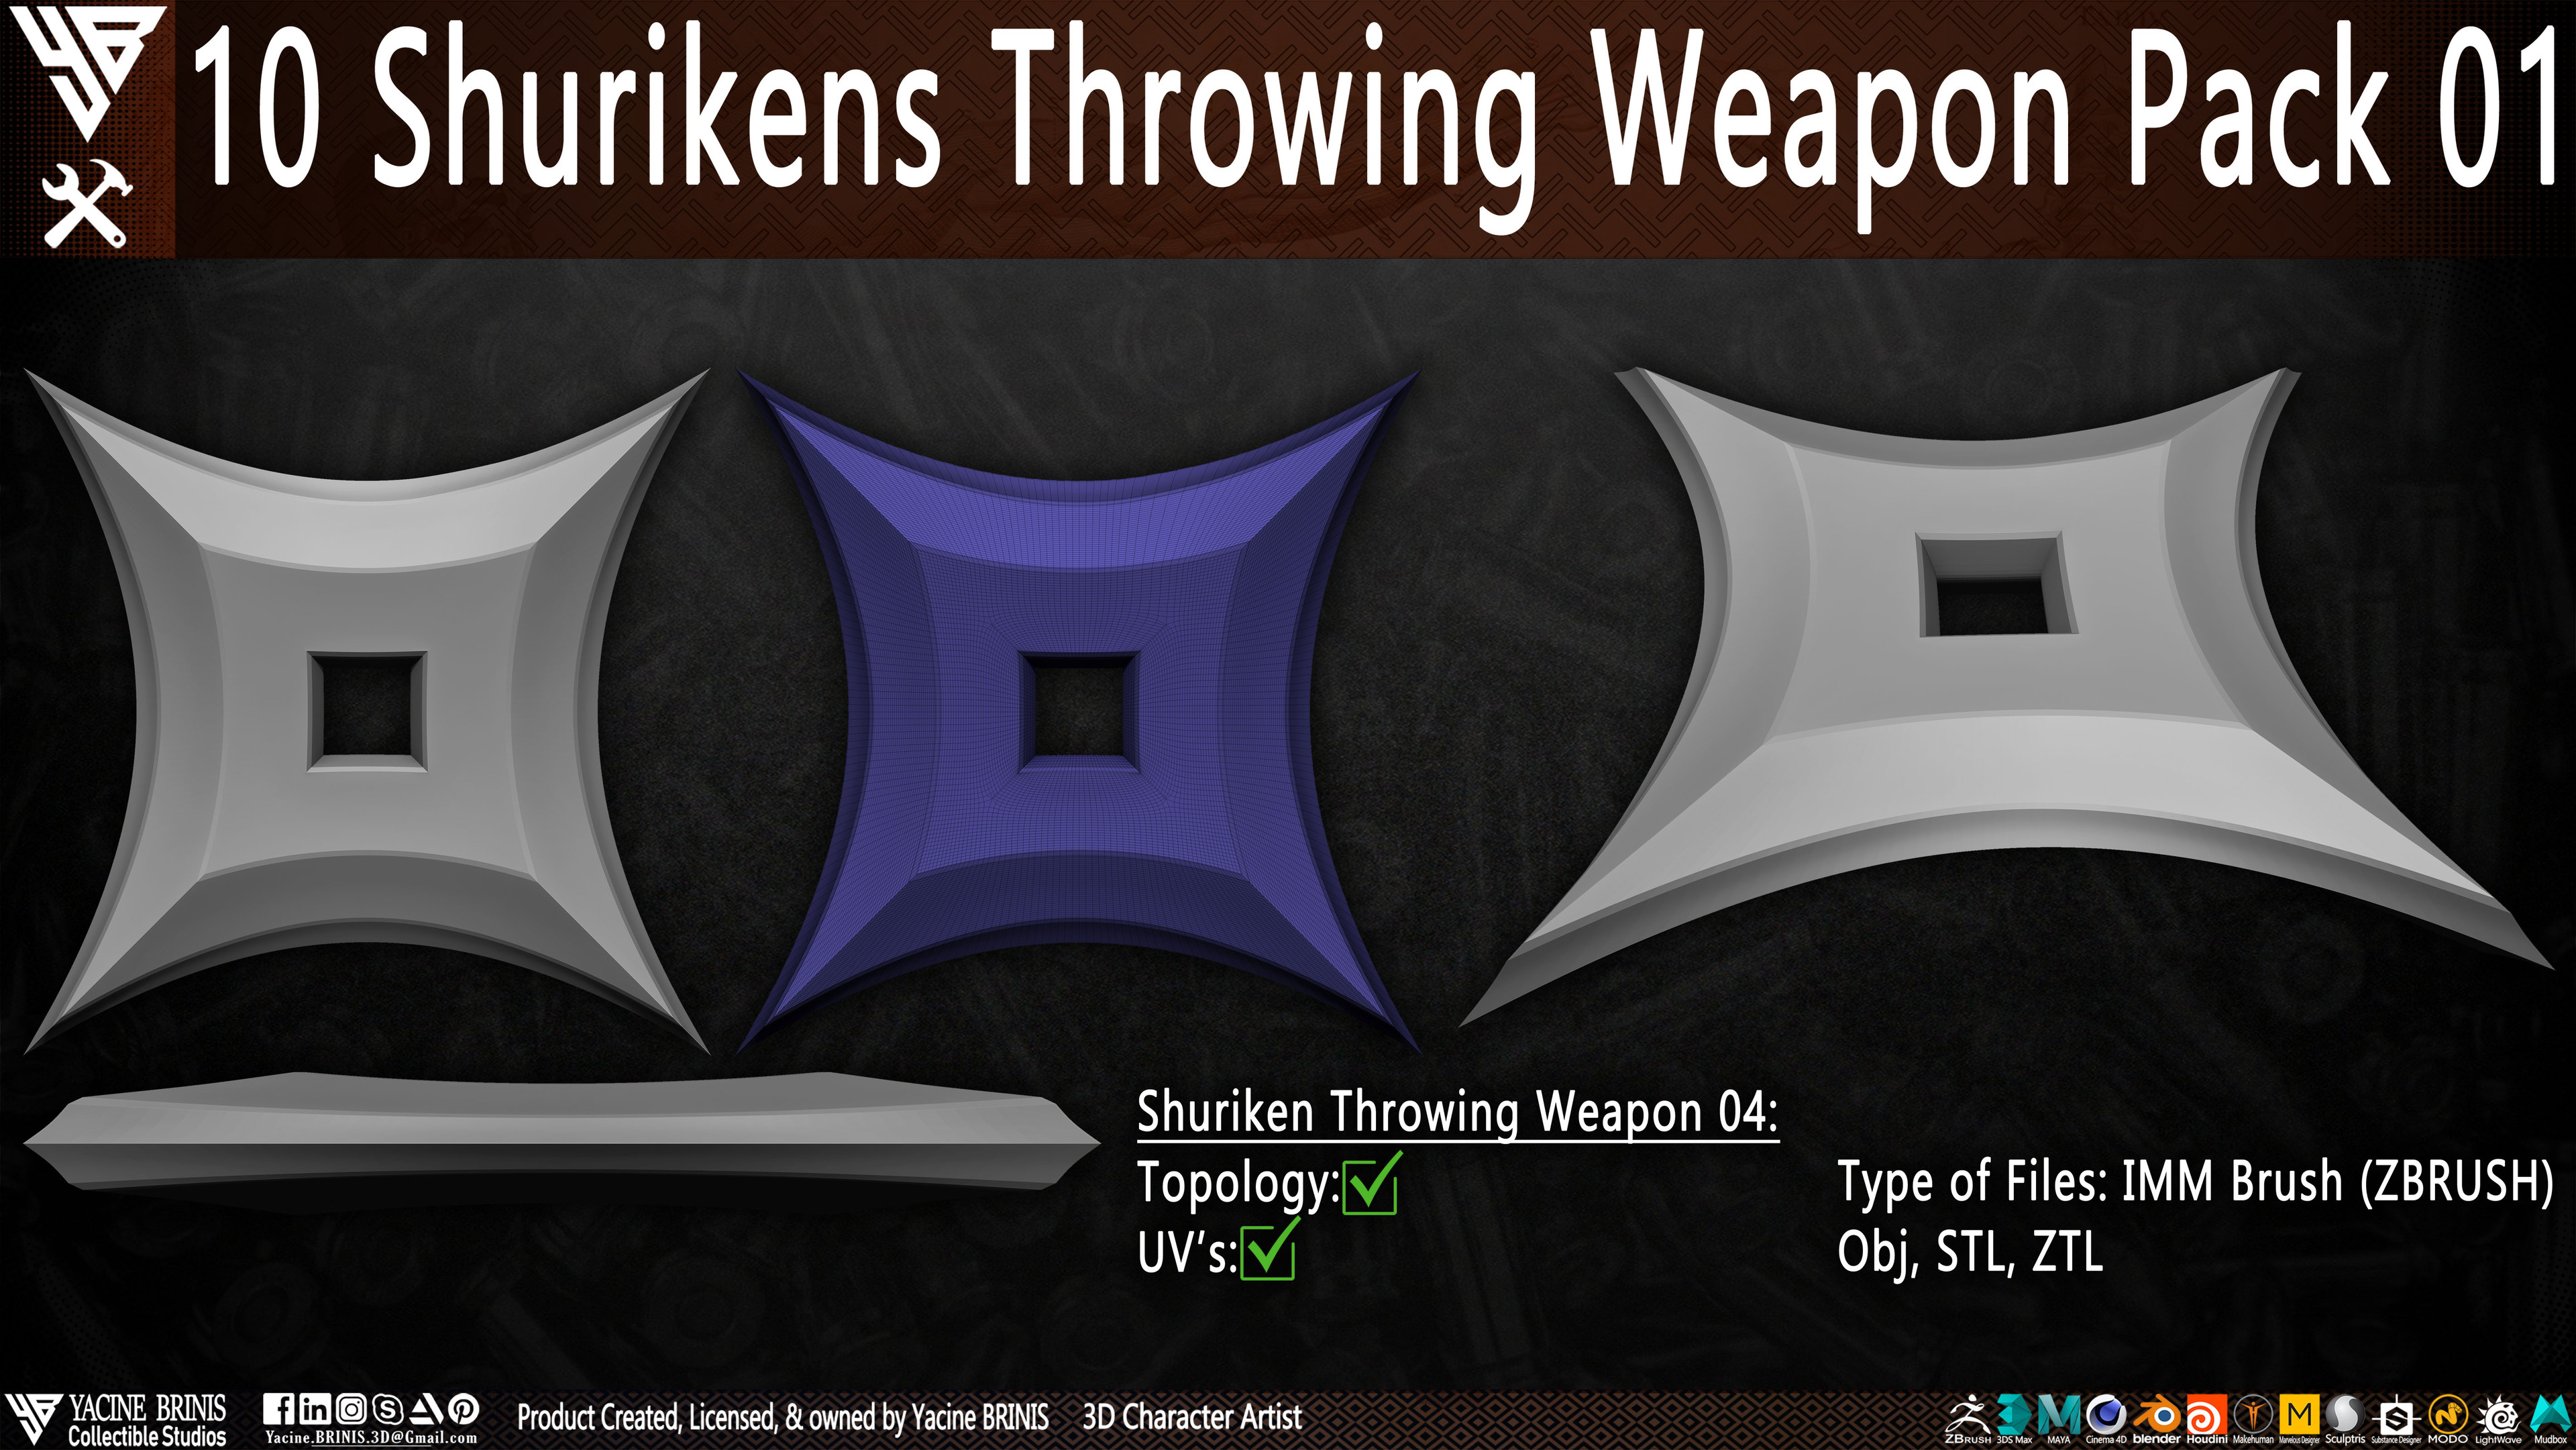 10 Shurikens Throwing Weapon Pack 01 sculpted by Yacine BRINIS Set 08